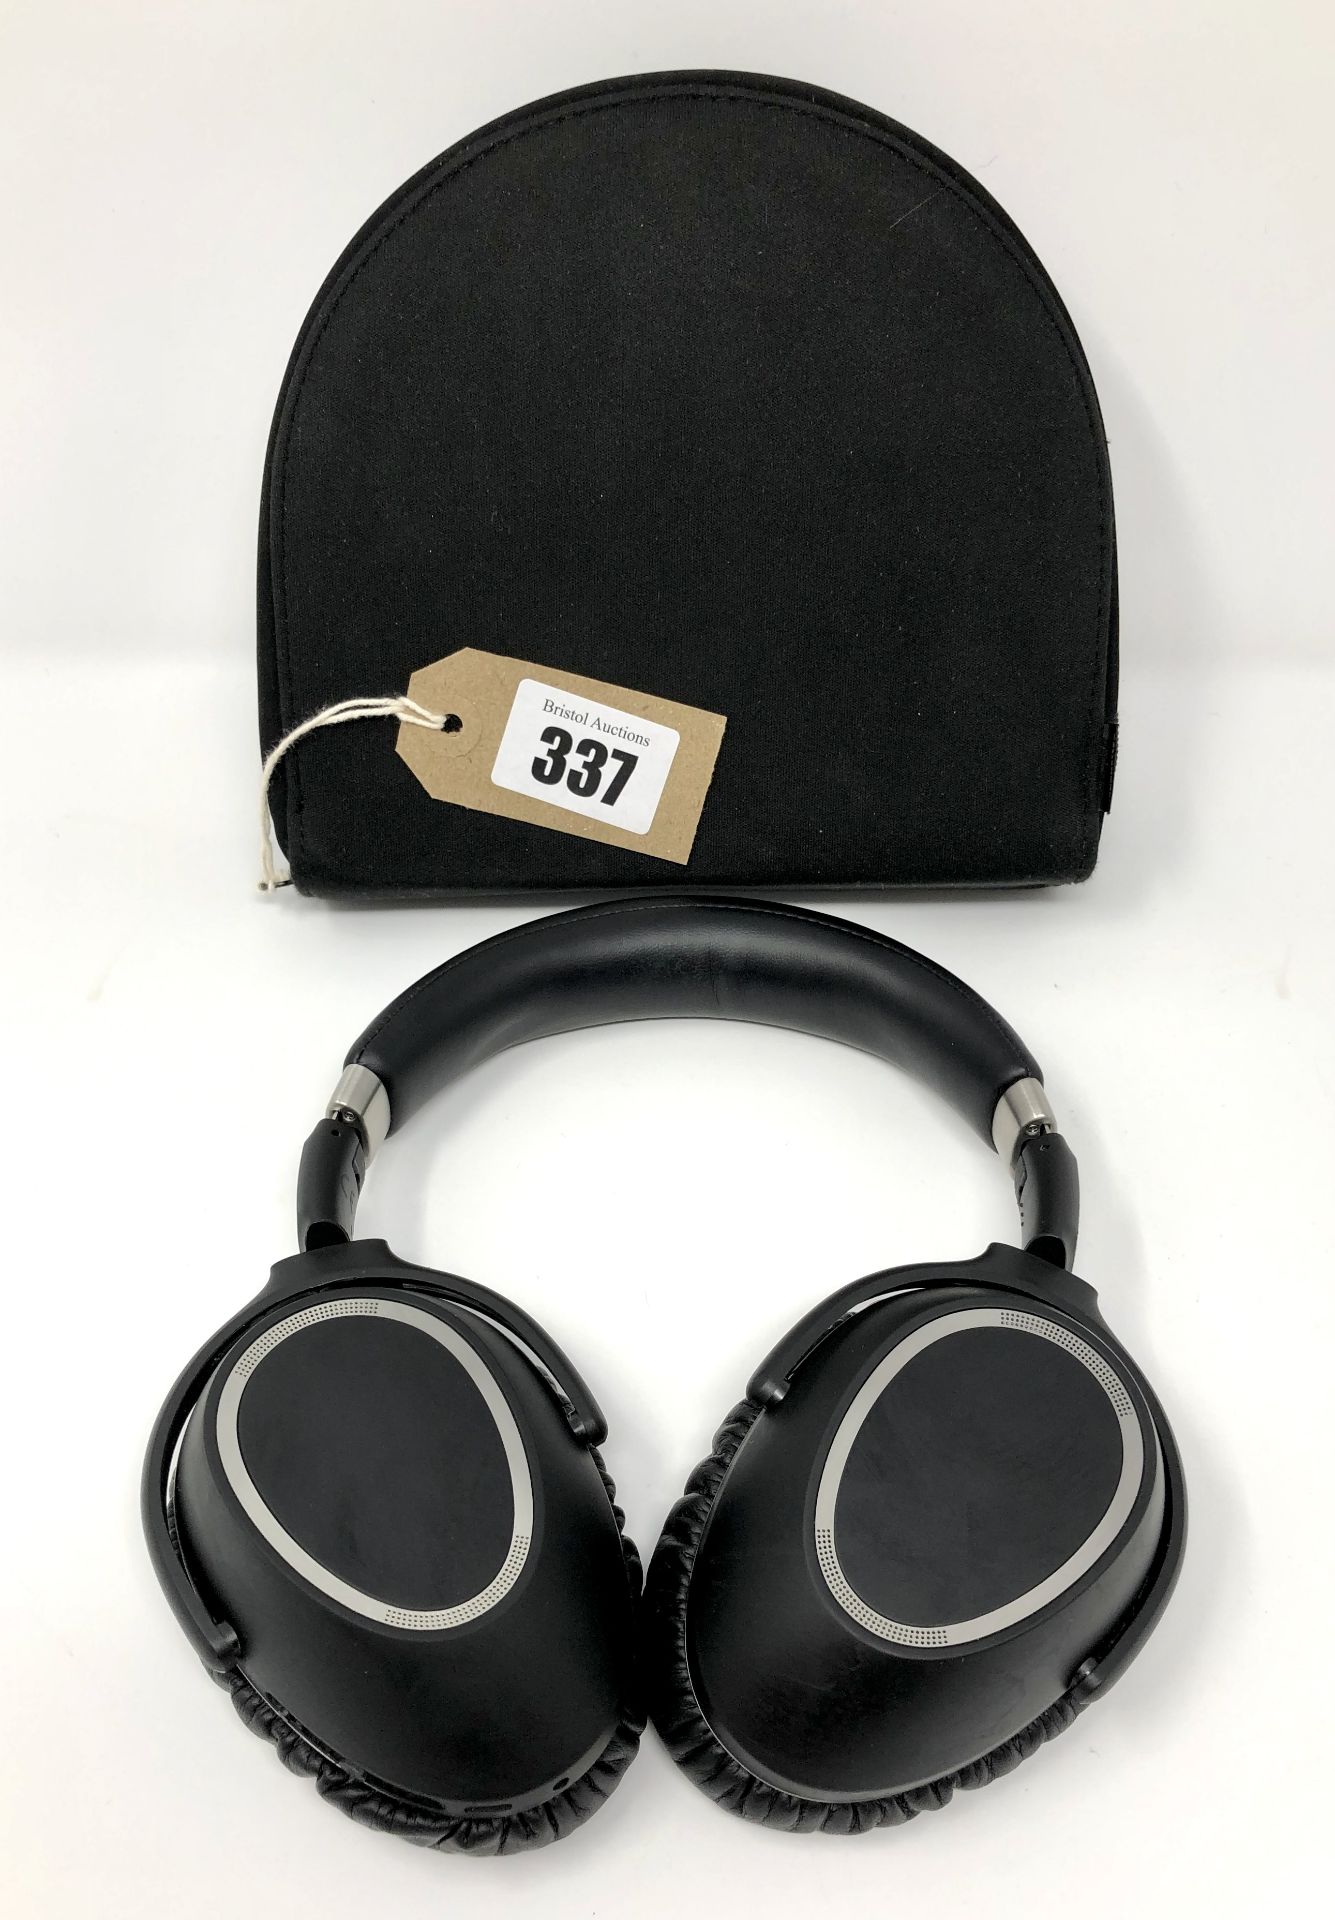 A preowned pair of Sennheiser PXC 550 Wireless On-Ear Headphones in black with case.